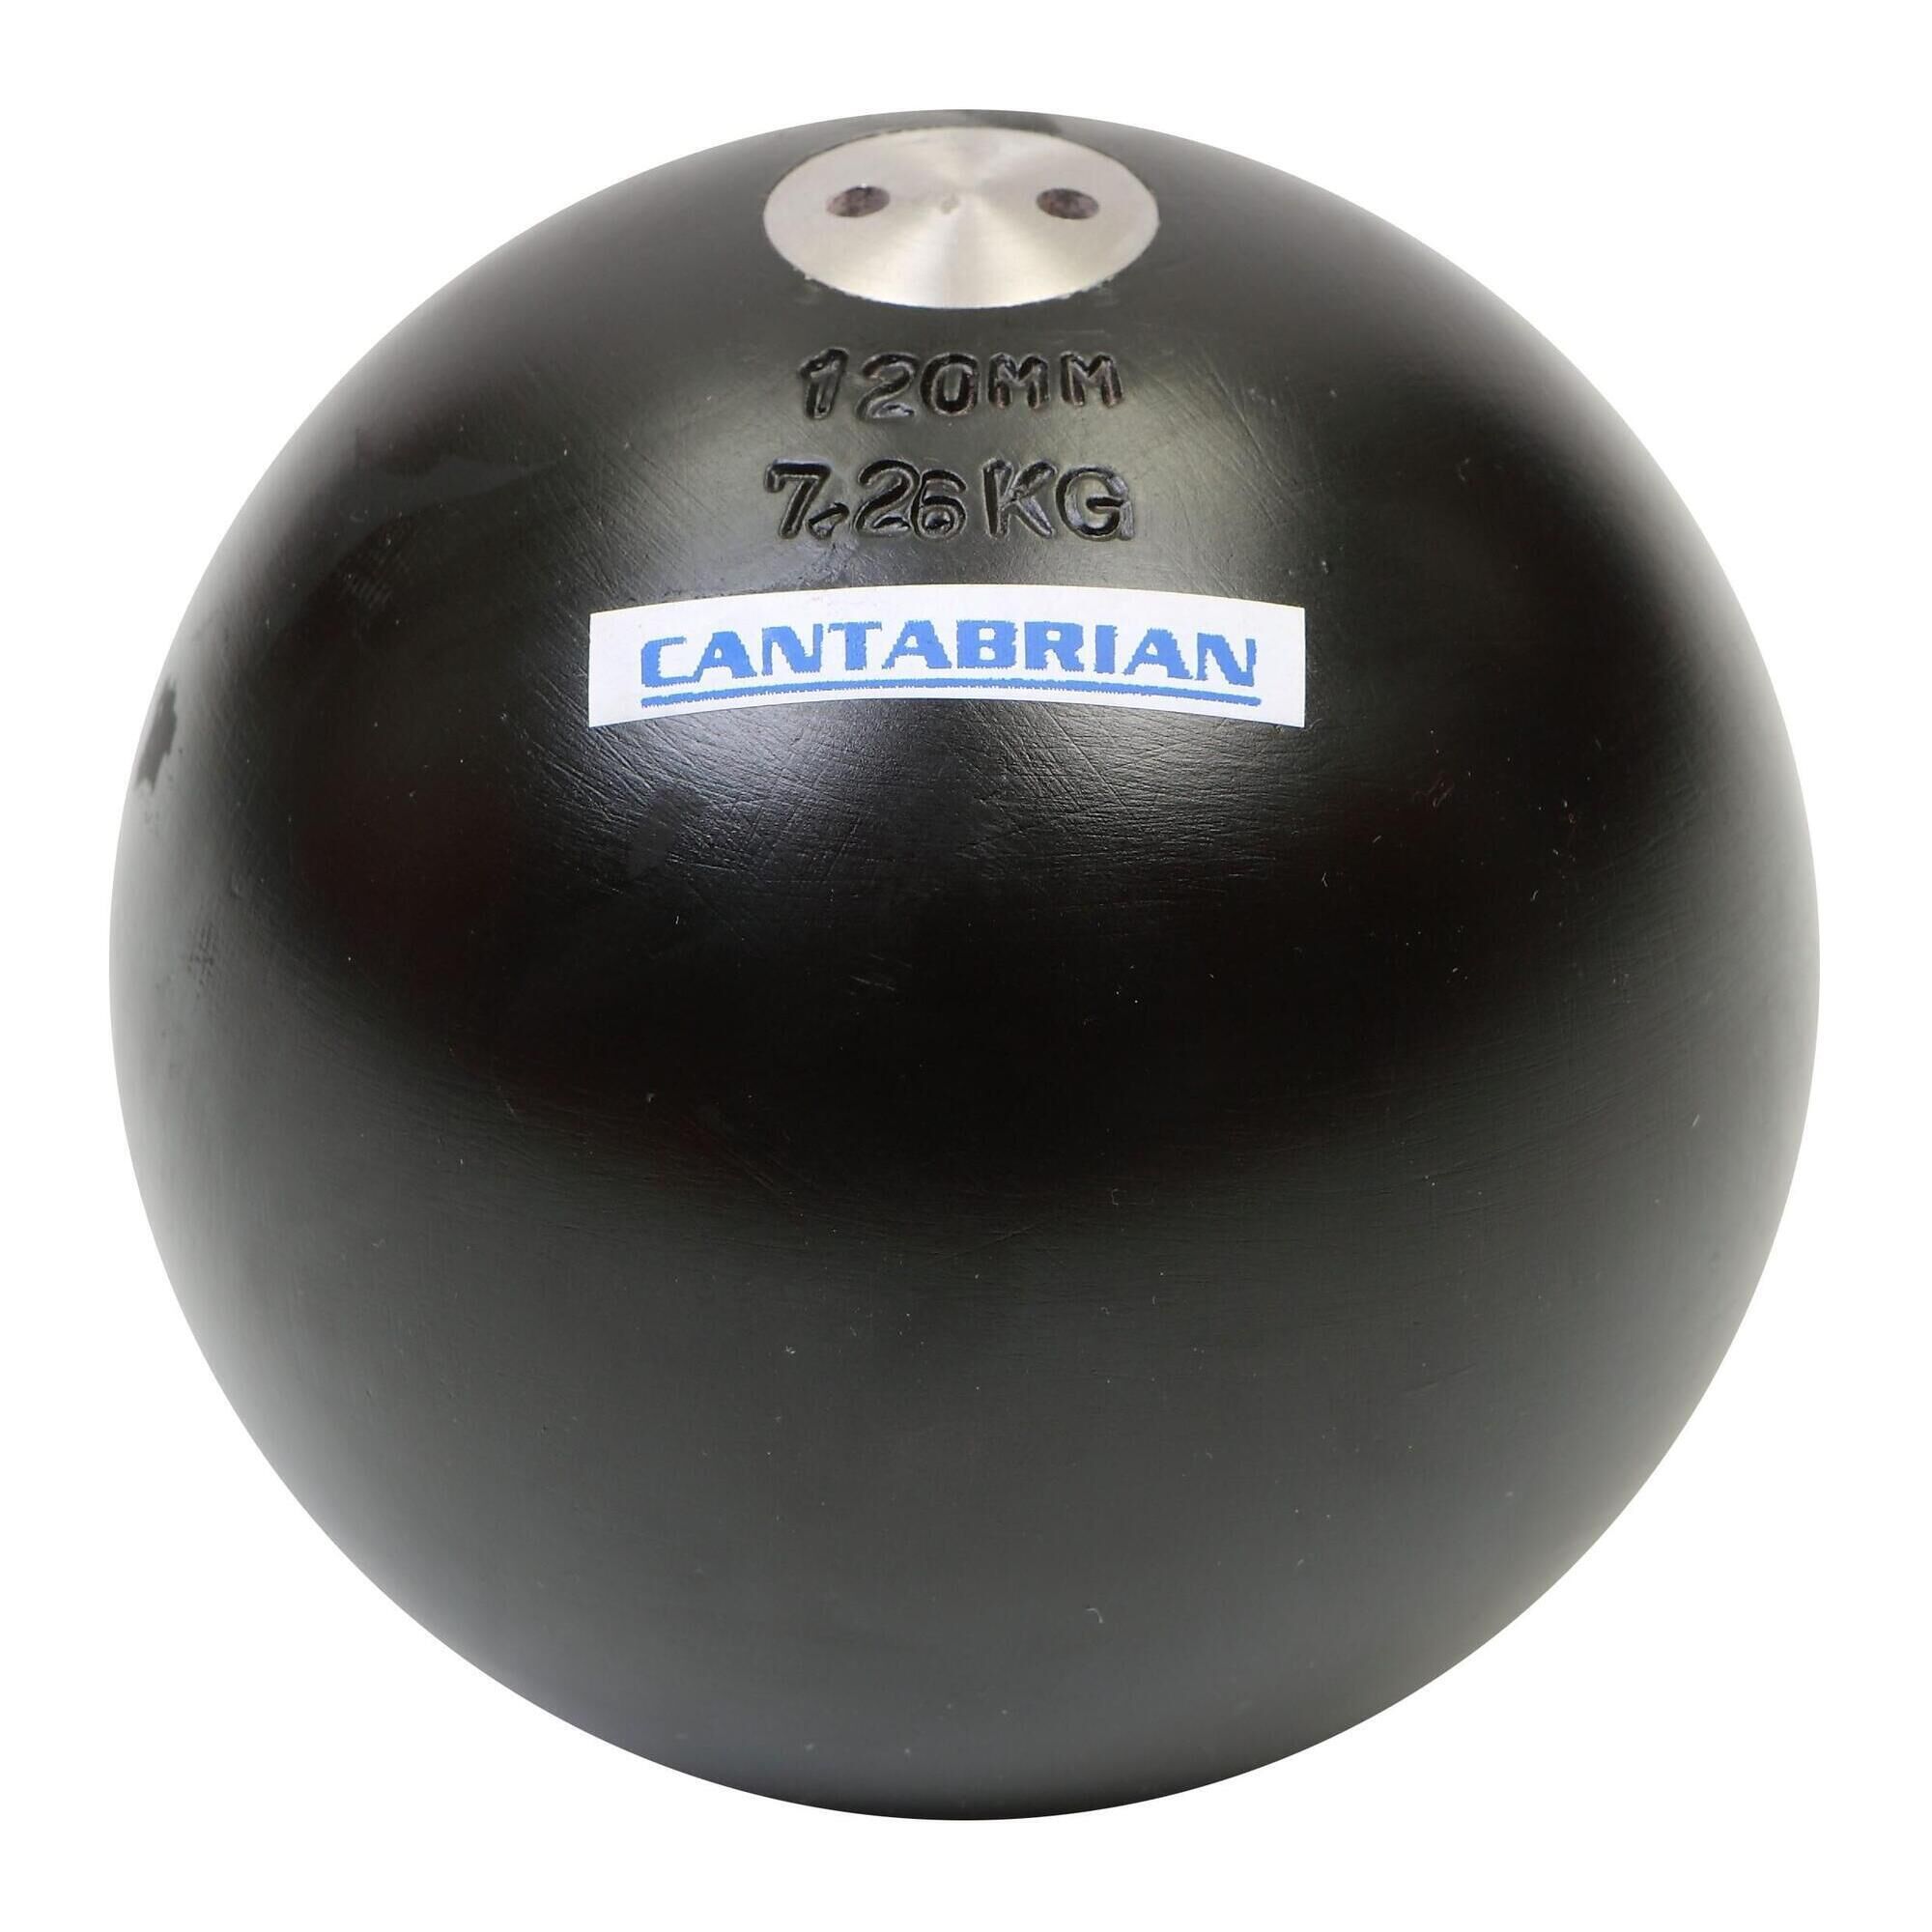 CANTABRIAN Cantabrian Olympic Steel Shot Puts - 108mm dia